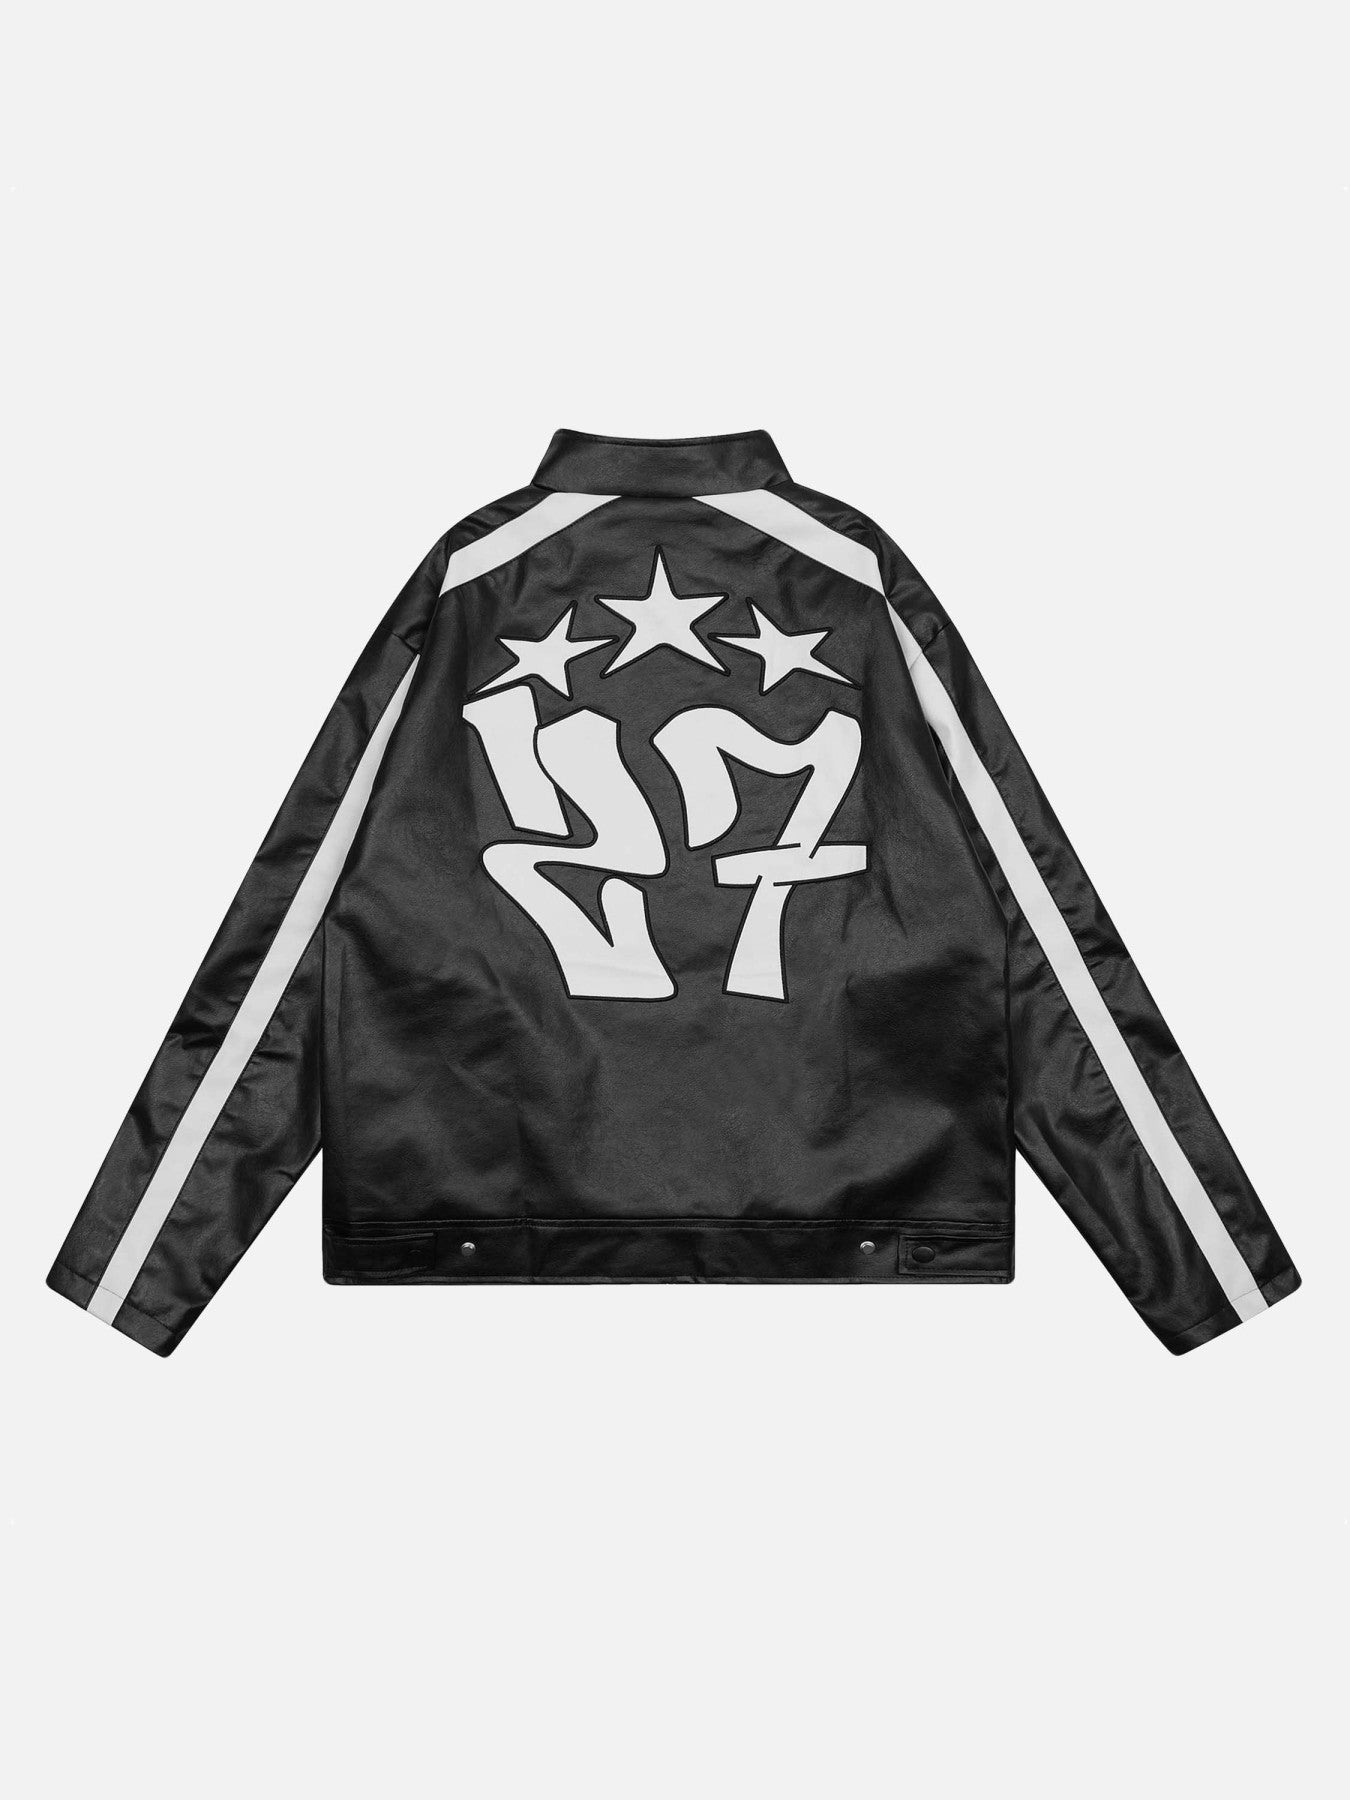 The Supermade Biker Style Embroidered Jacket